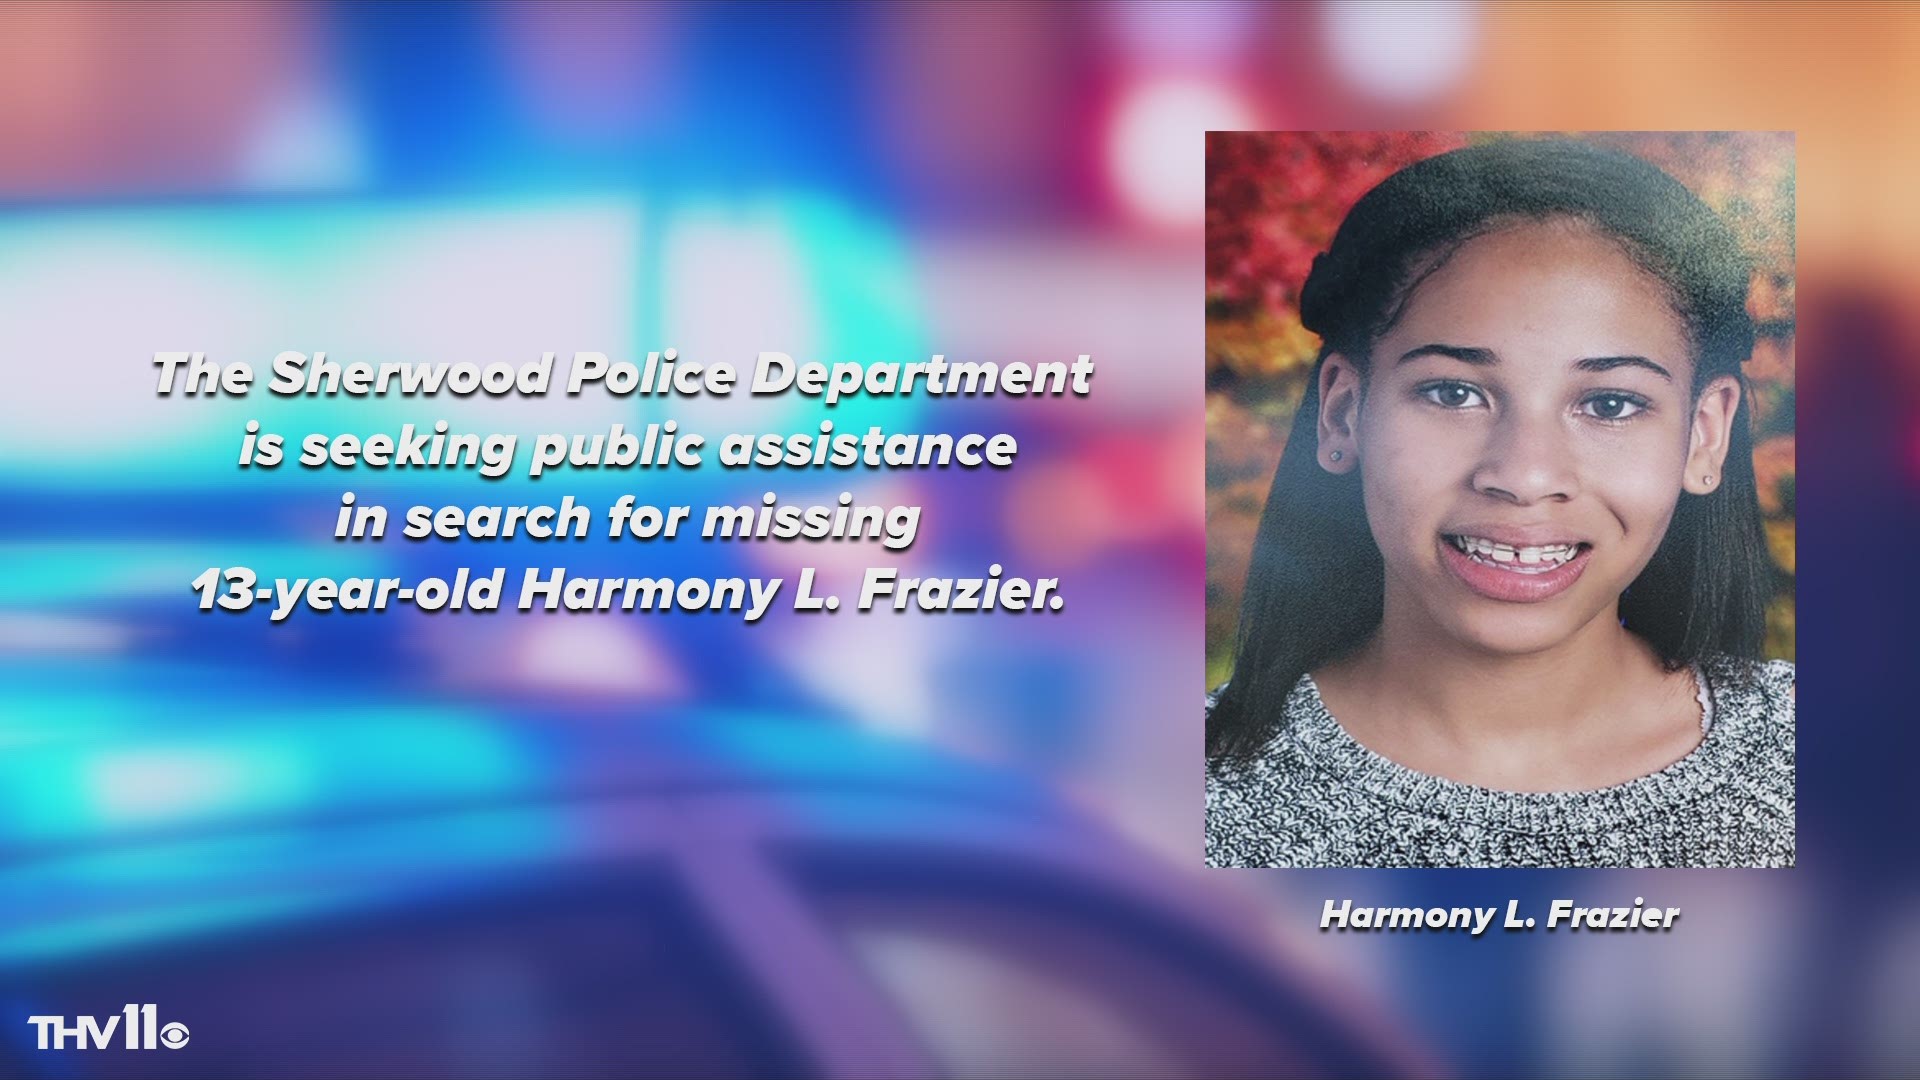 Sherwood police seeks public assistance in finding missing 13-year-old girl